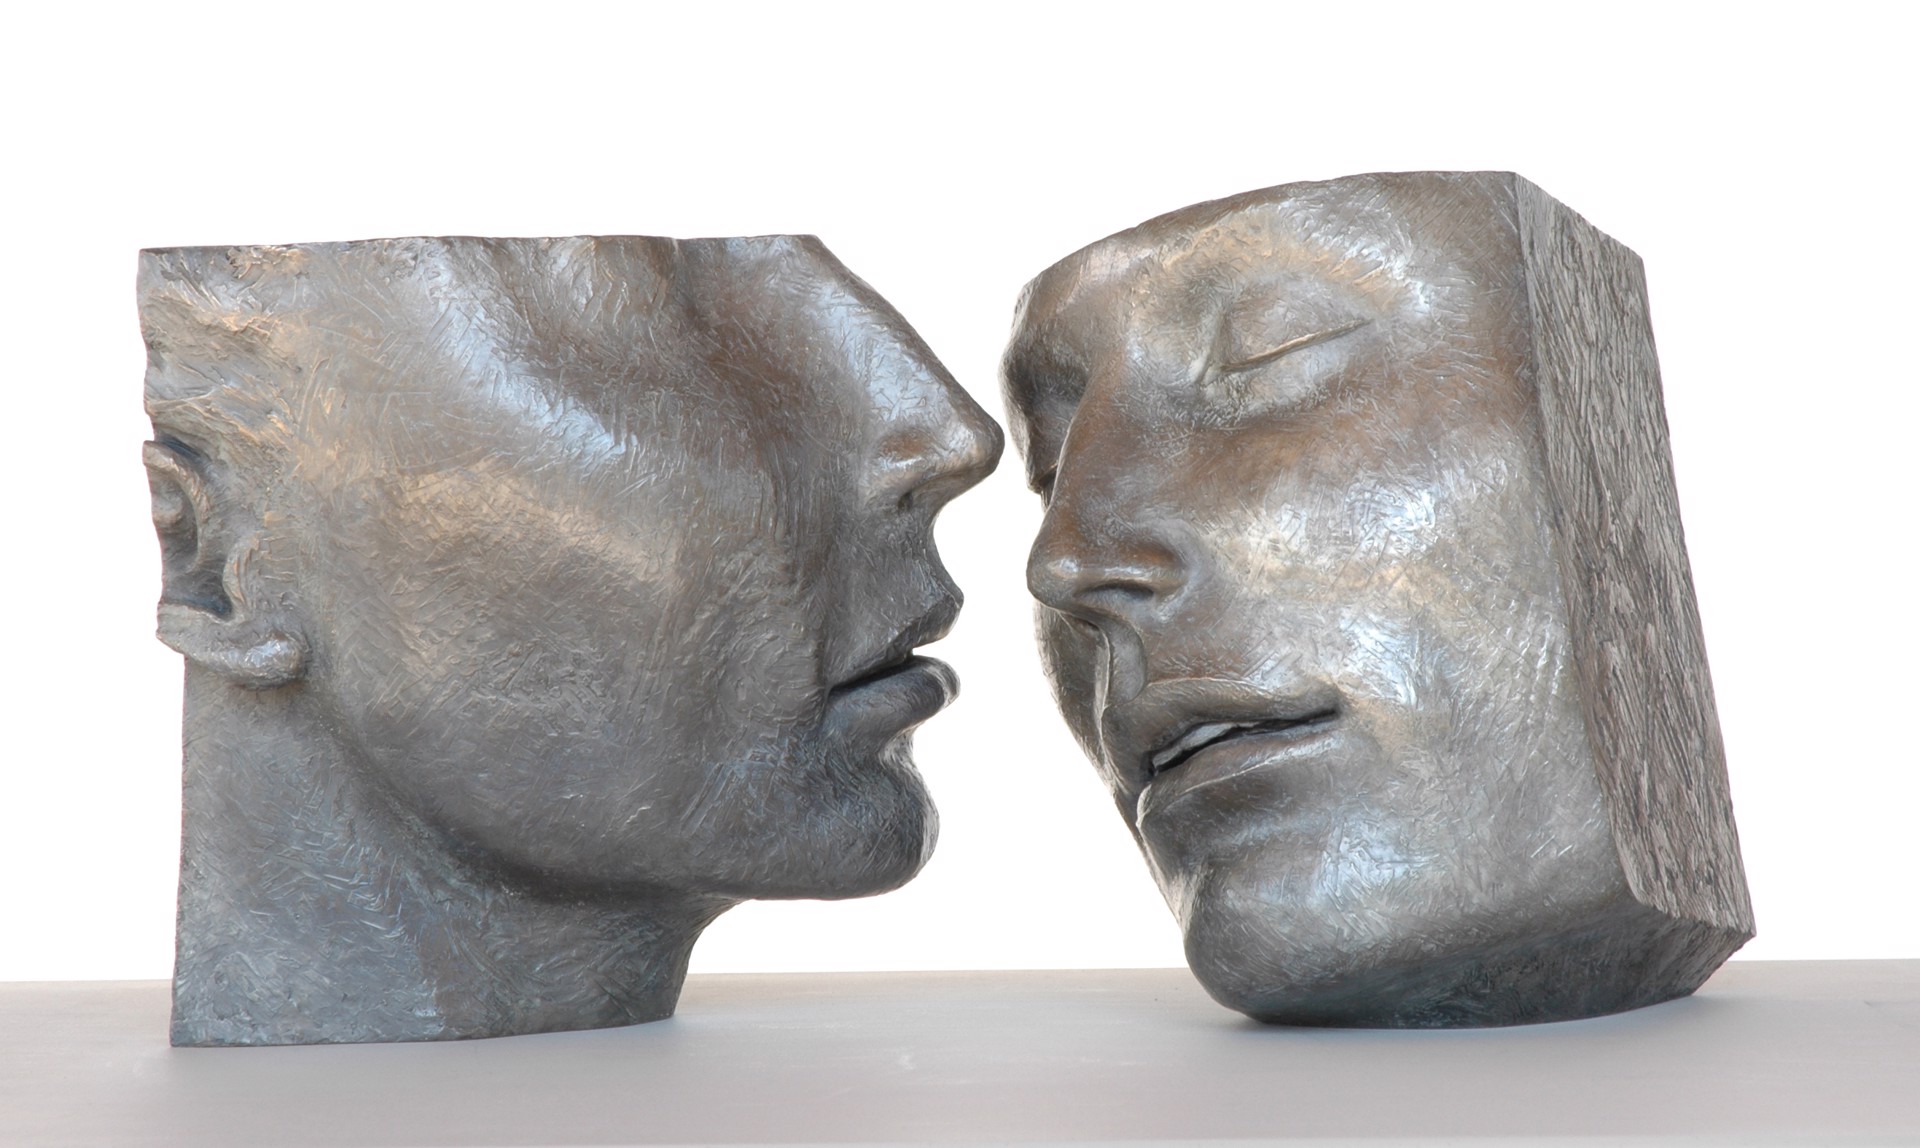 Together Series III Near Kiss 8/12 by Susan Stamm Evans